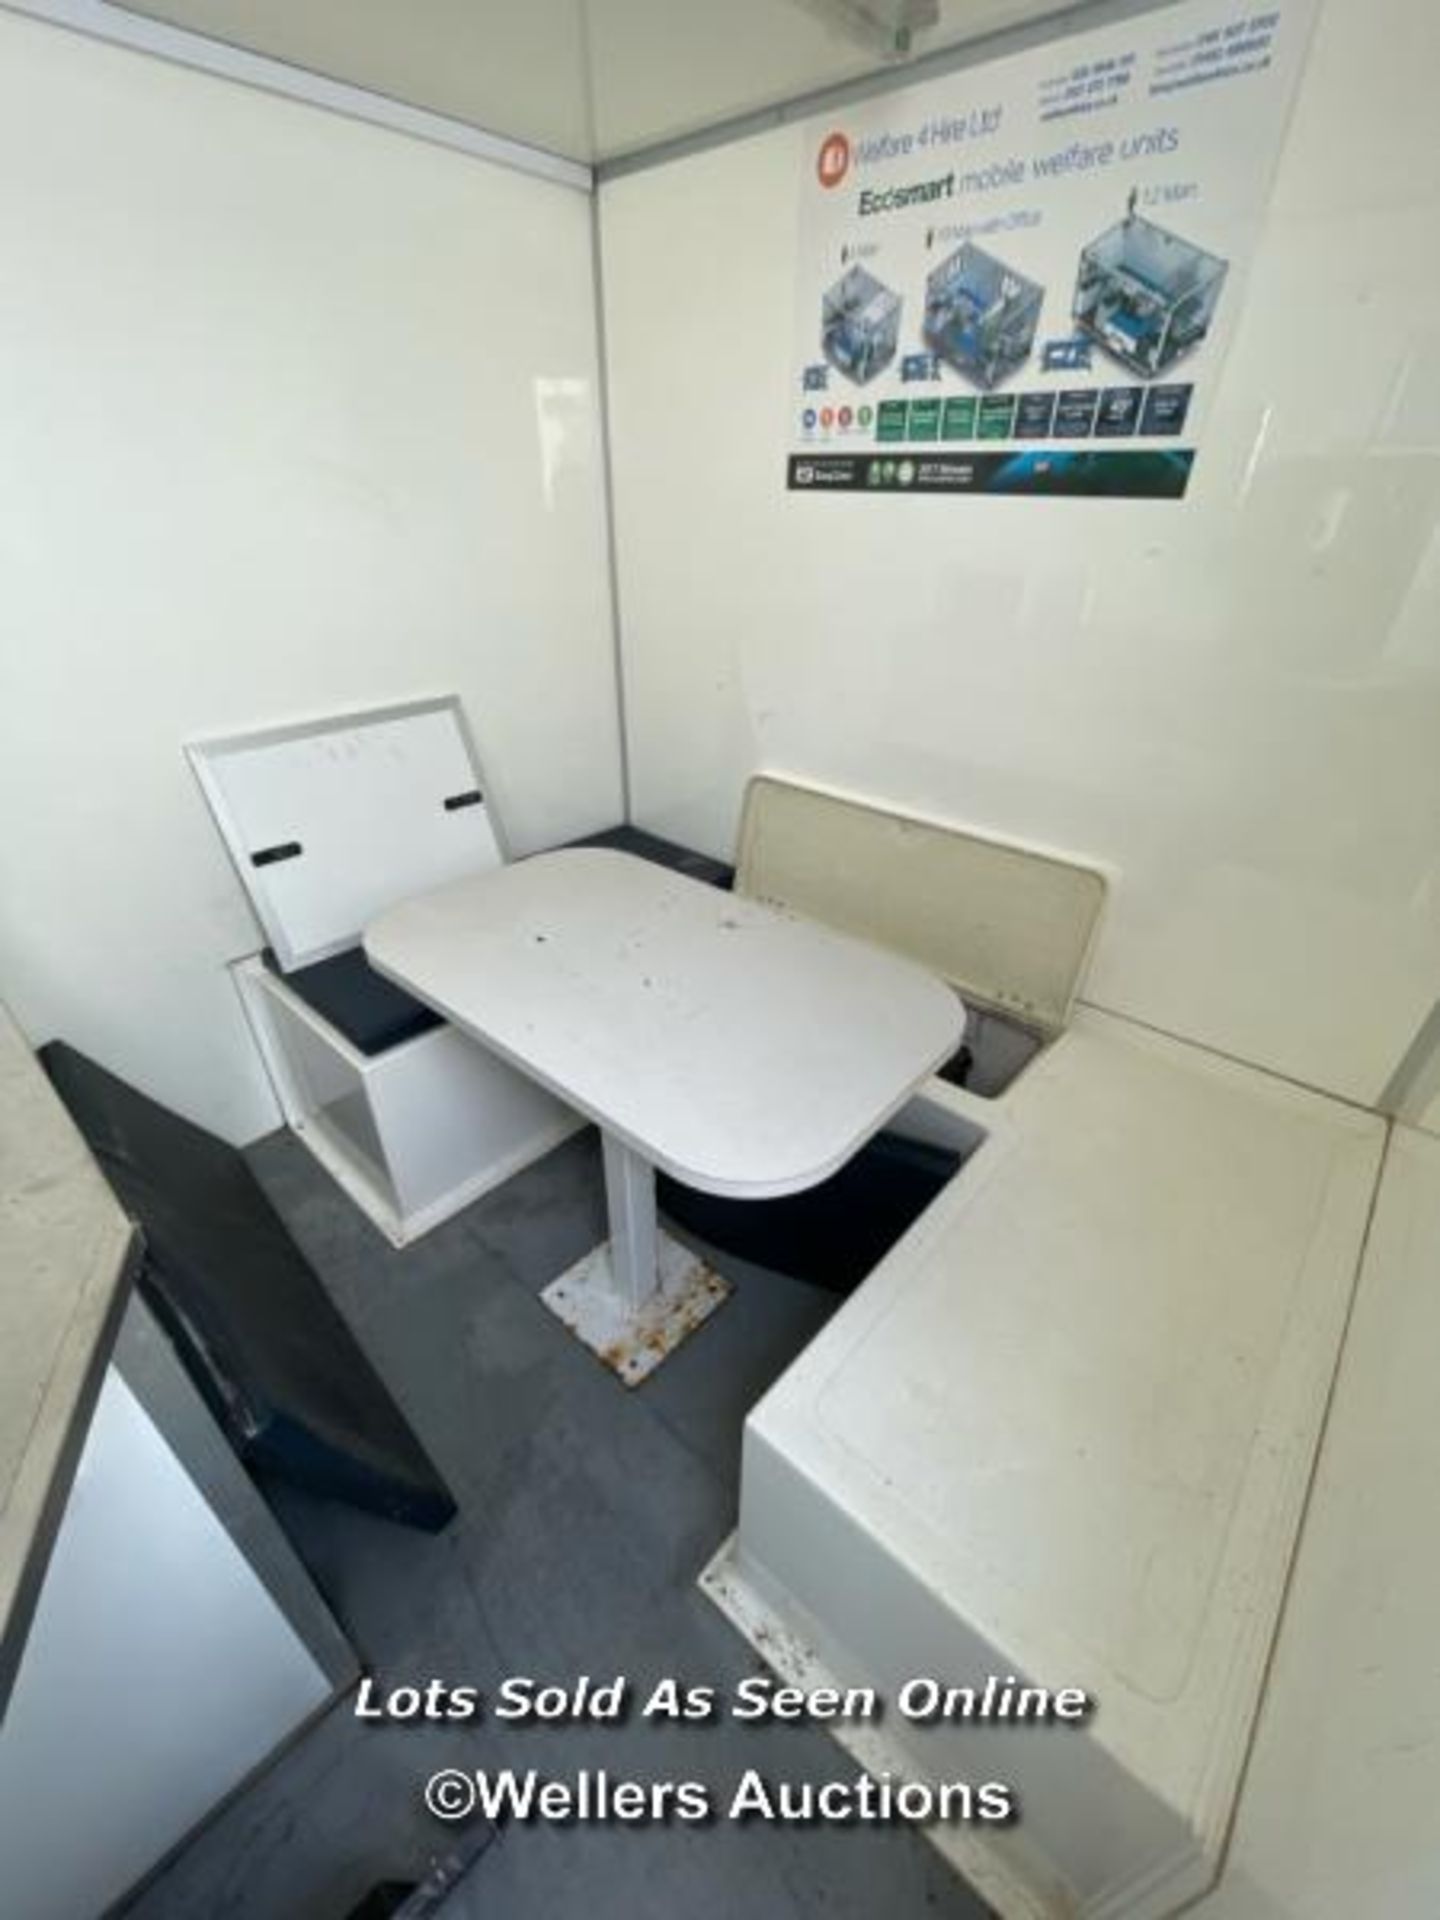 6 PERSON 12 X 7.5FT AJC EASY CABIN TOWABLE WELFARE UNIT, INCLUDES WASH BASIN, KETTLE, MICROWAVE, - Image 7 of 18